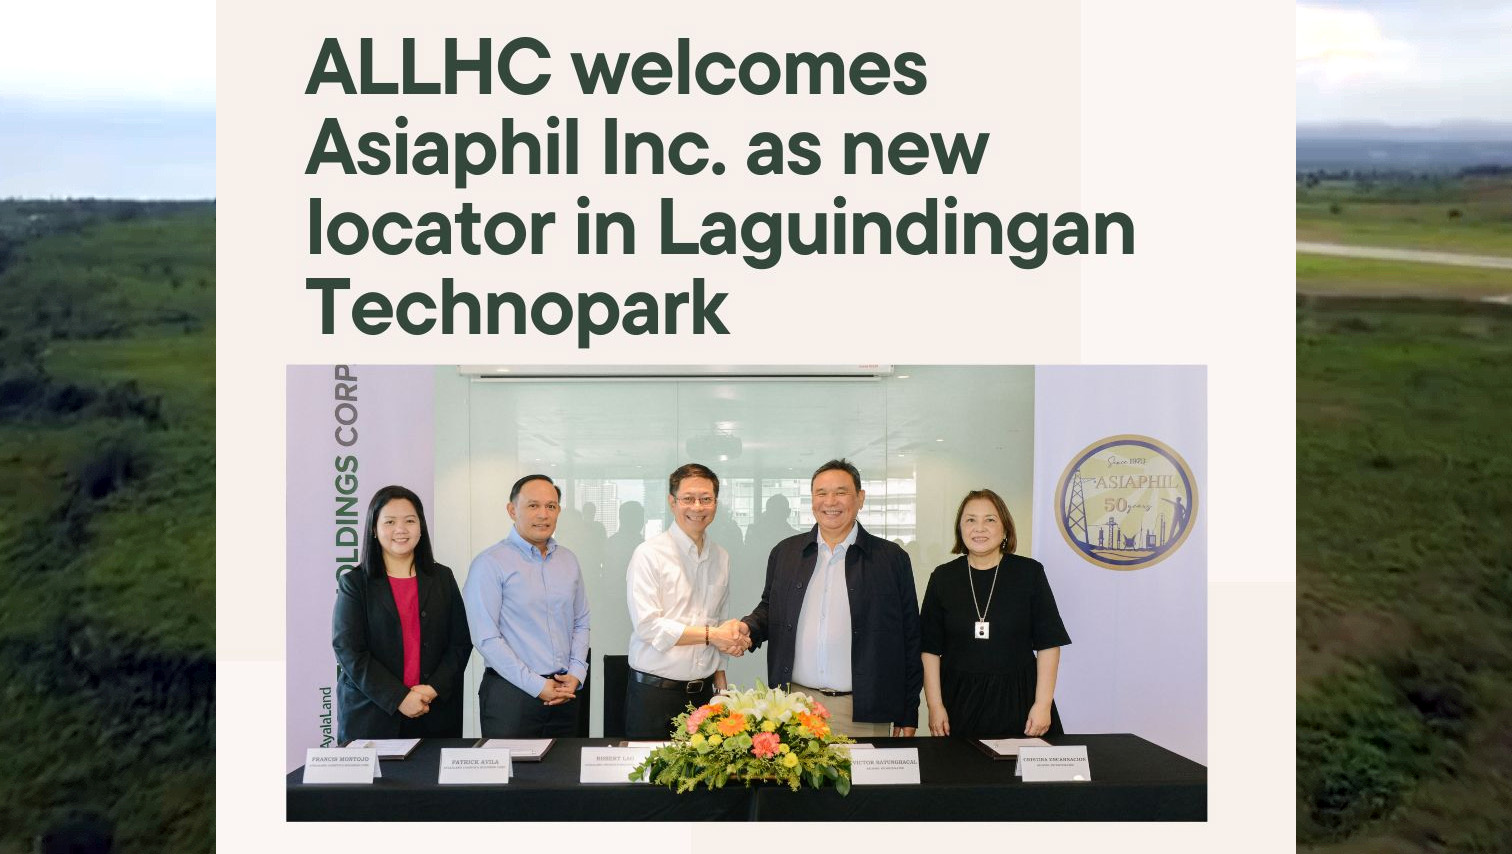 PROJECT WATCH: Asiaphil is newest locator in Laguindingan Technopark